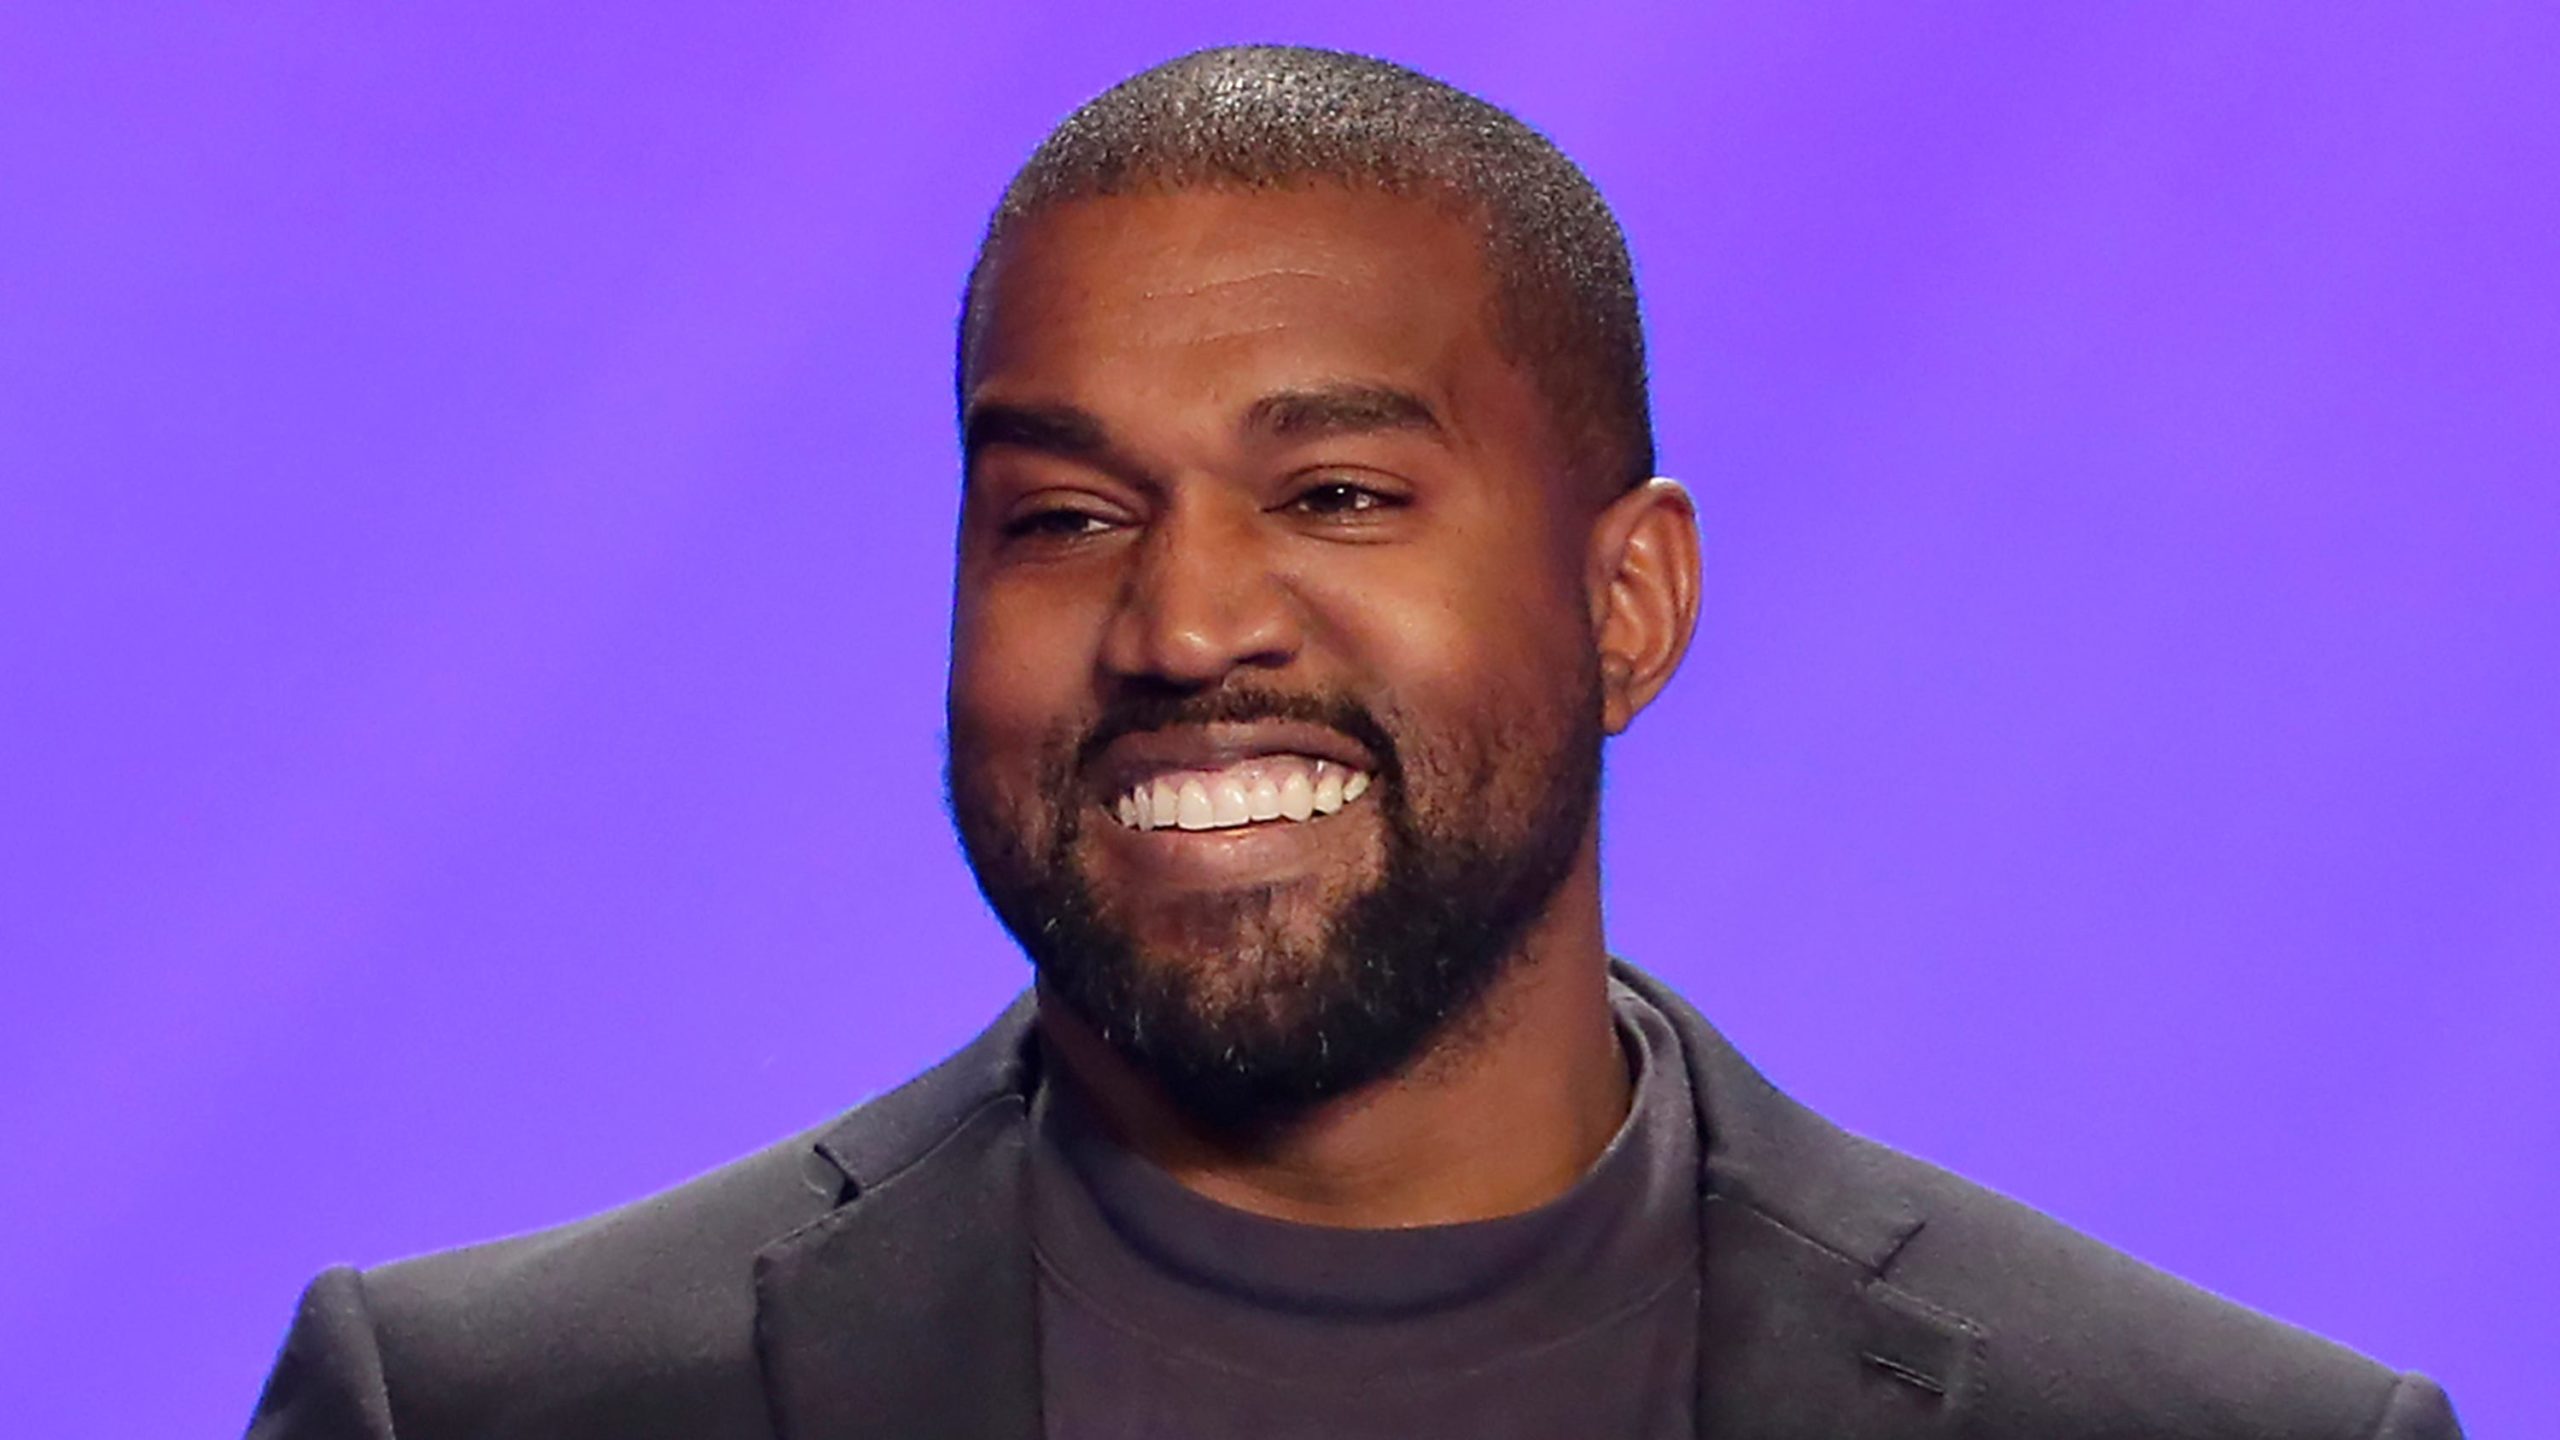 3 part Kanye West “documentary event” coming to Netflix (trailer included in blog)